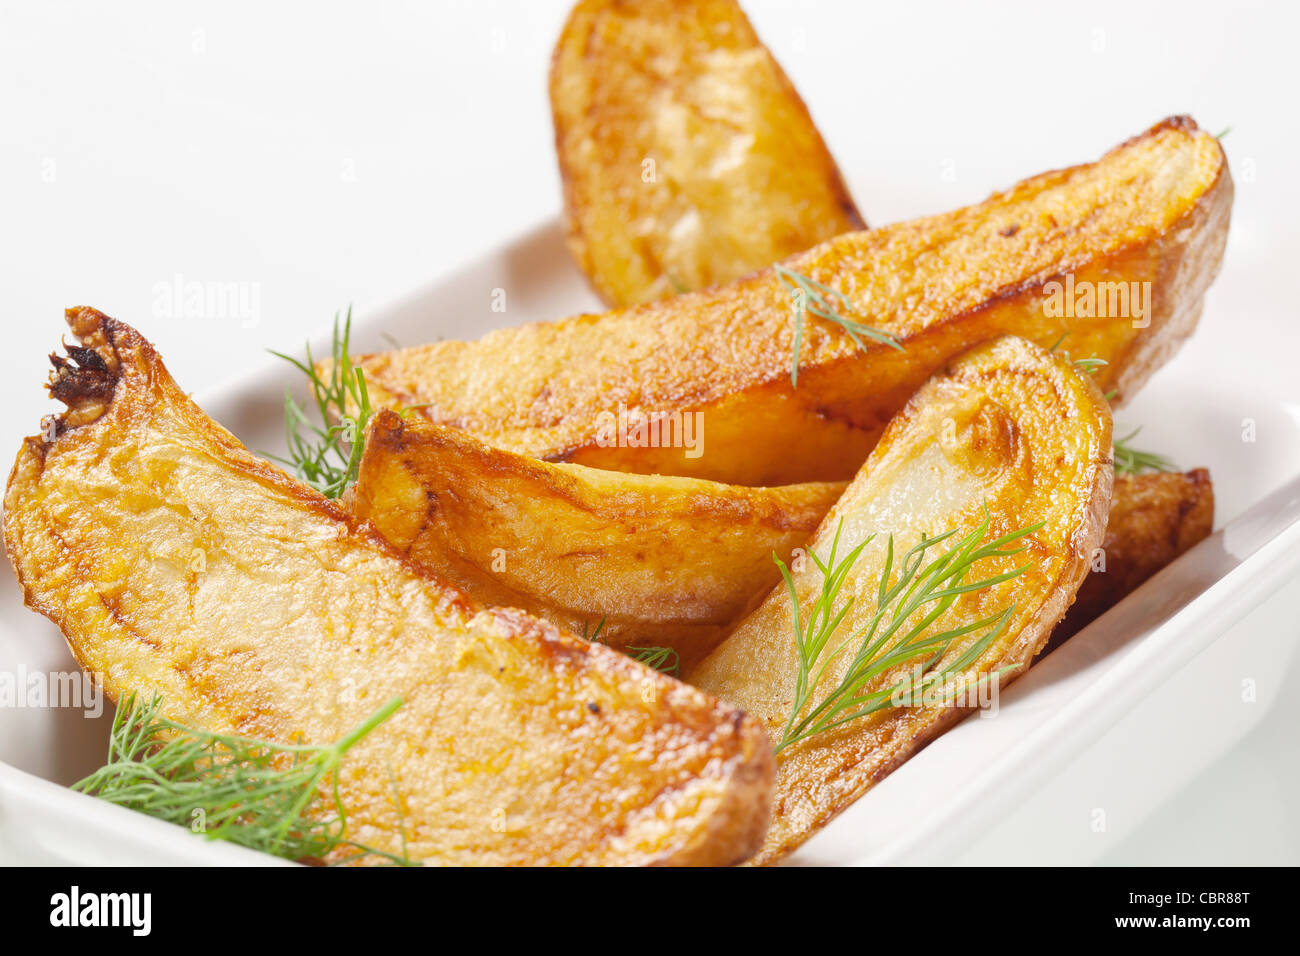 Roasted potato wedges garnished with fresh dill Stock Photo